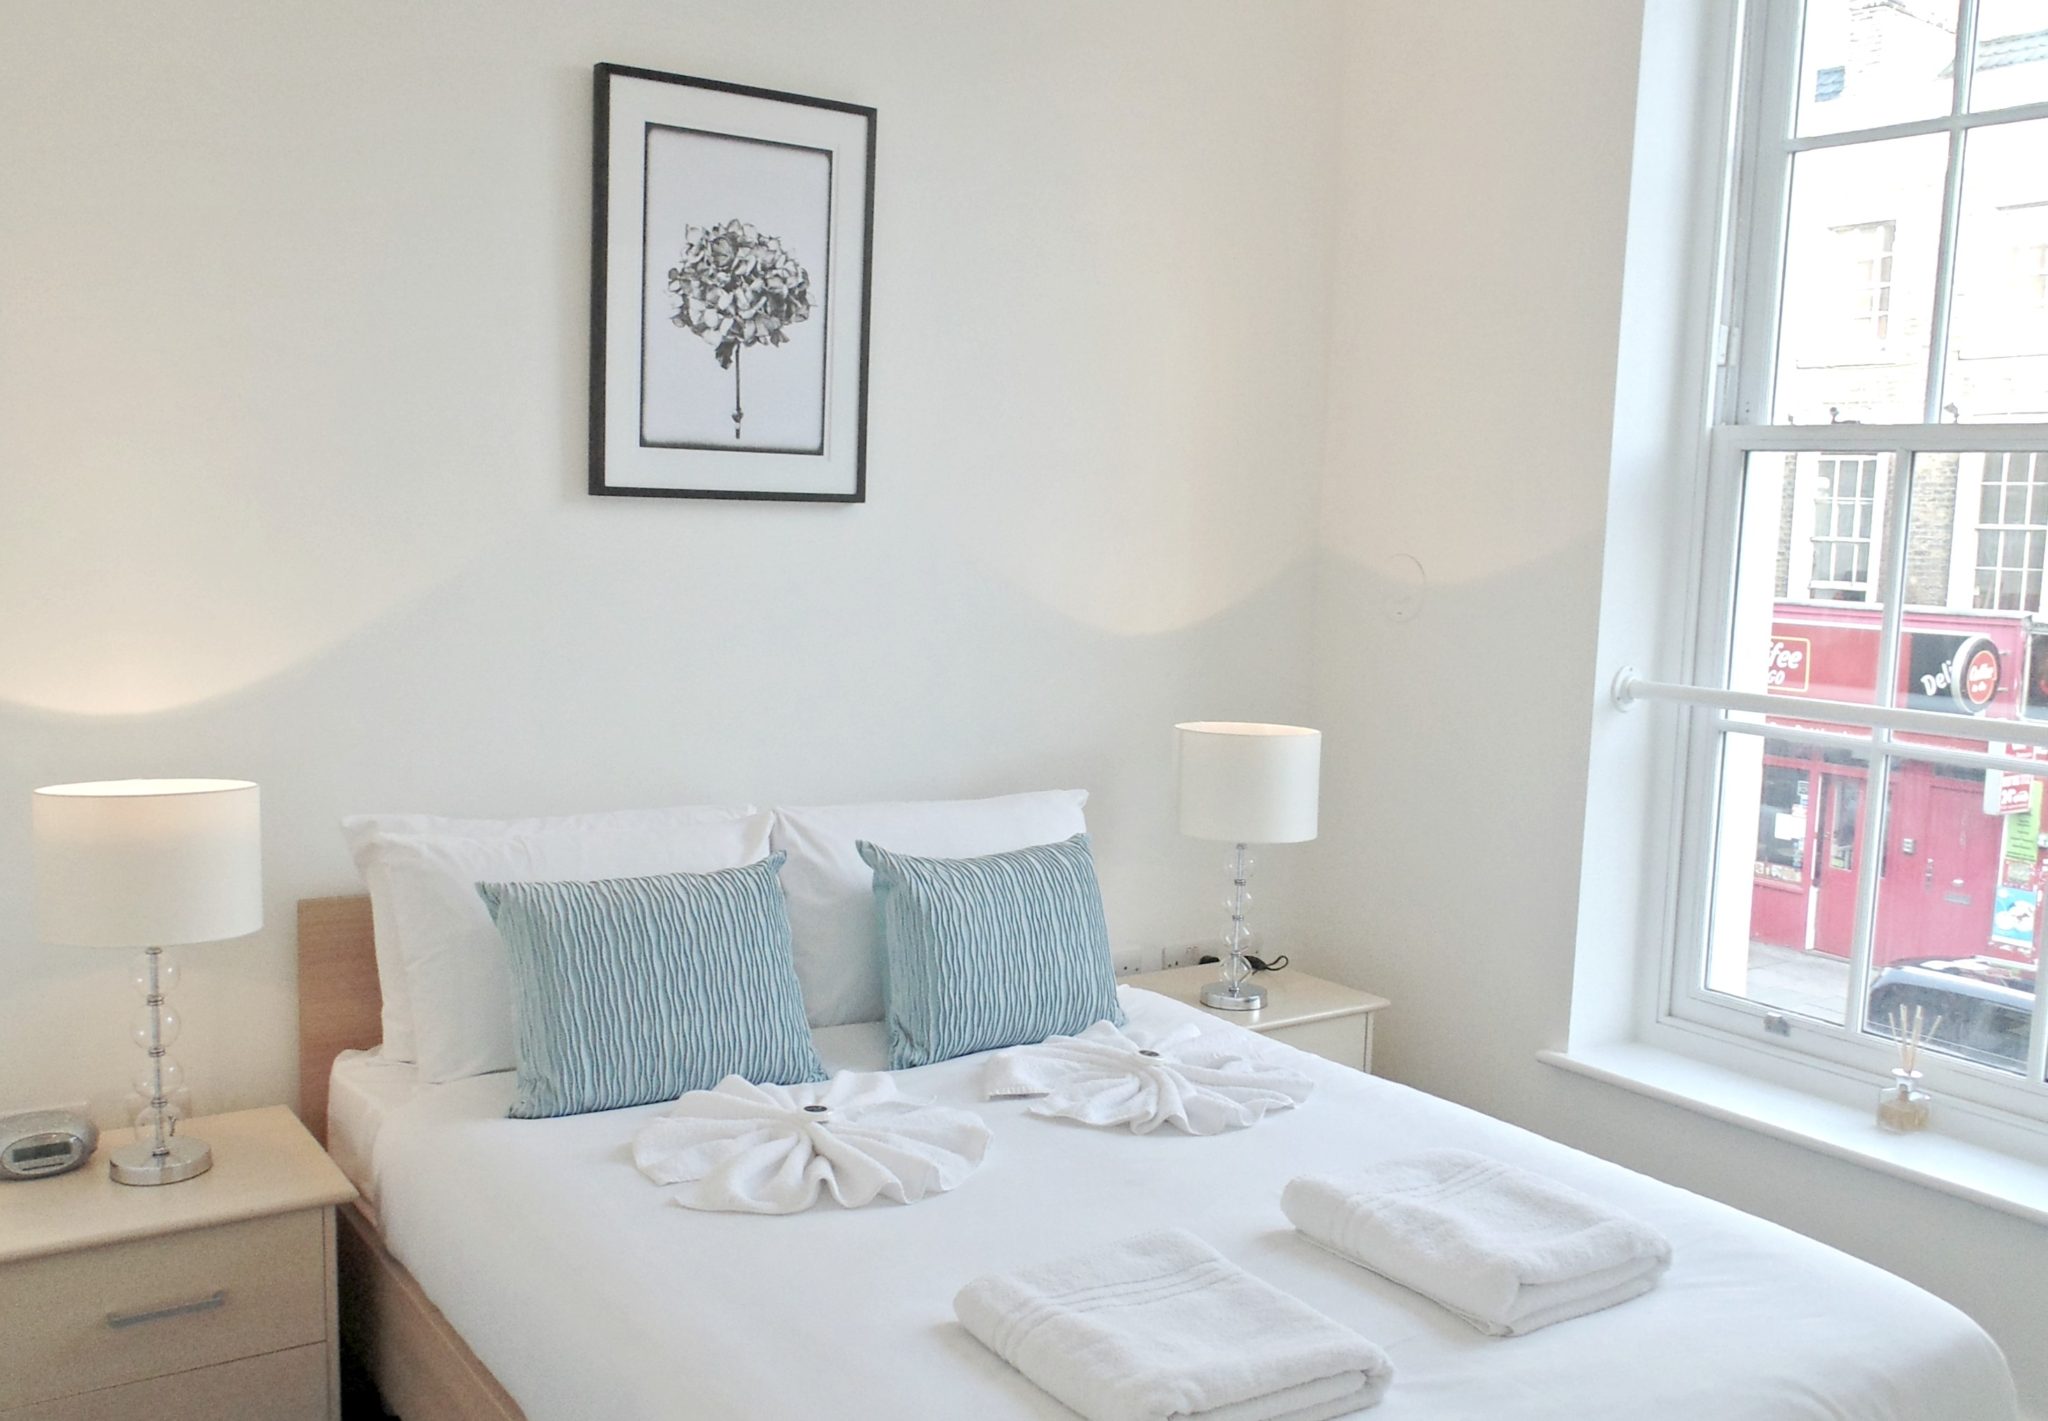 Amazing London Serviced Accommodation King's Cross! Free Wifi - No Booking Fees - Quality London Short Lets - Professional Service! +44 (0) 208 691 3920